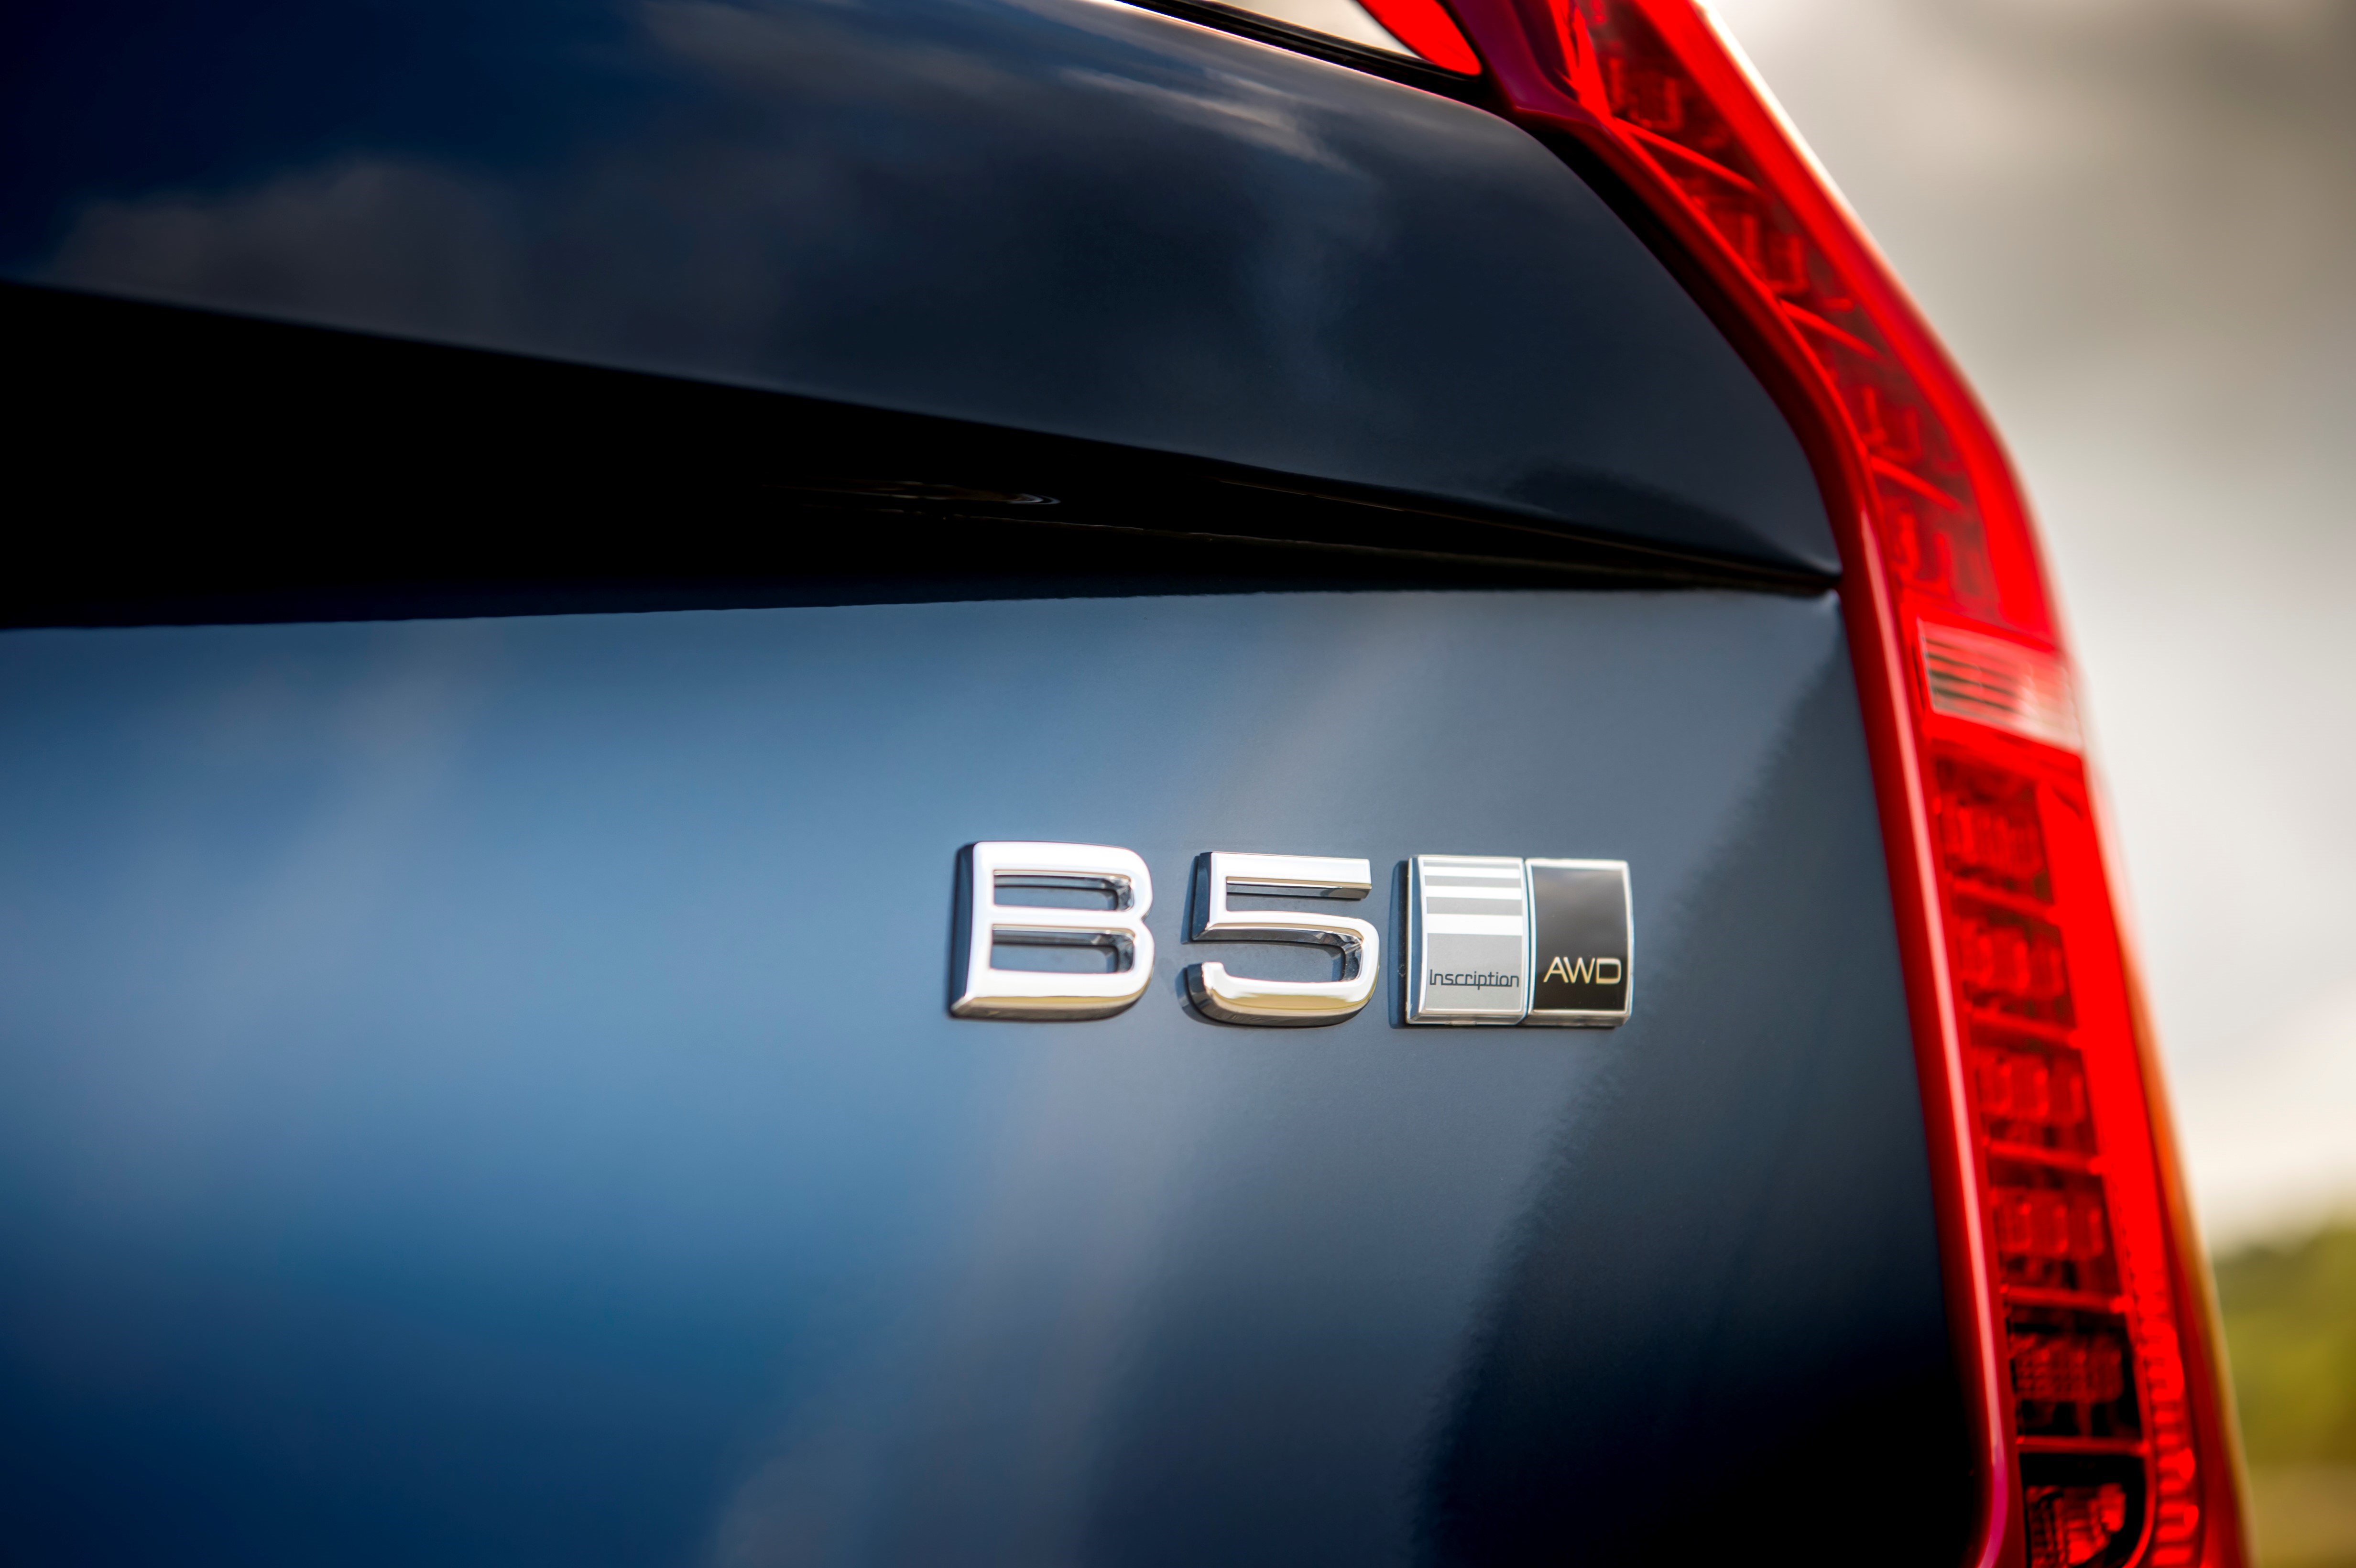 The B badge is a newly-introduced moniker from Volvo